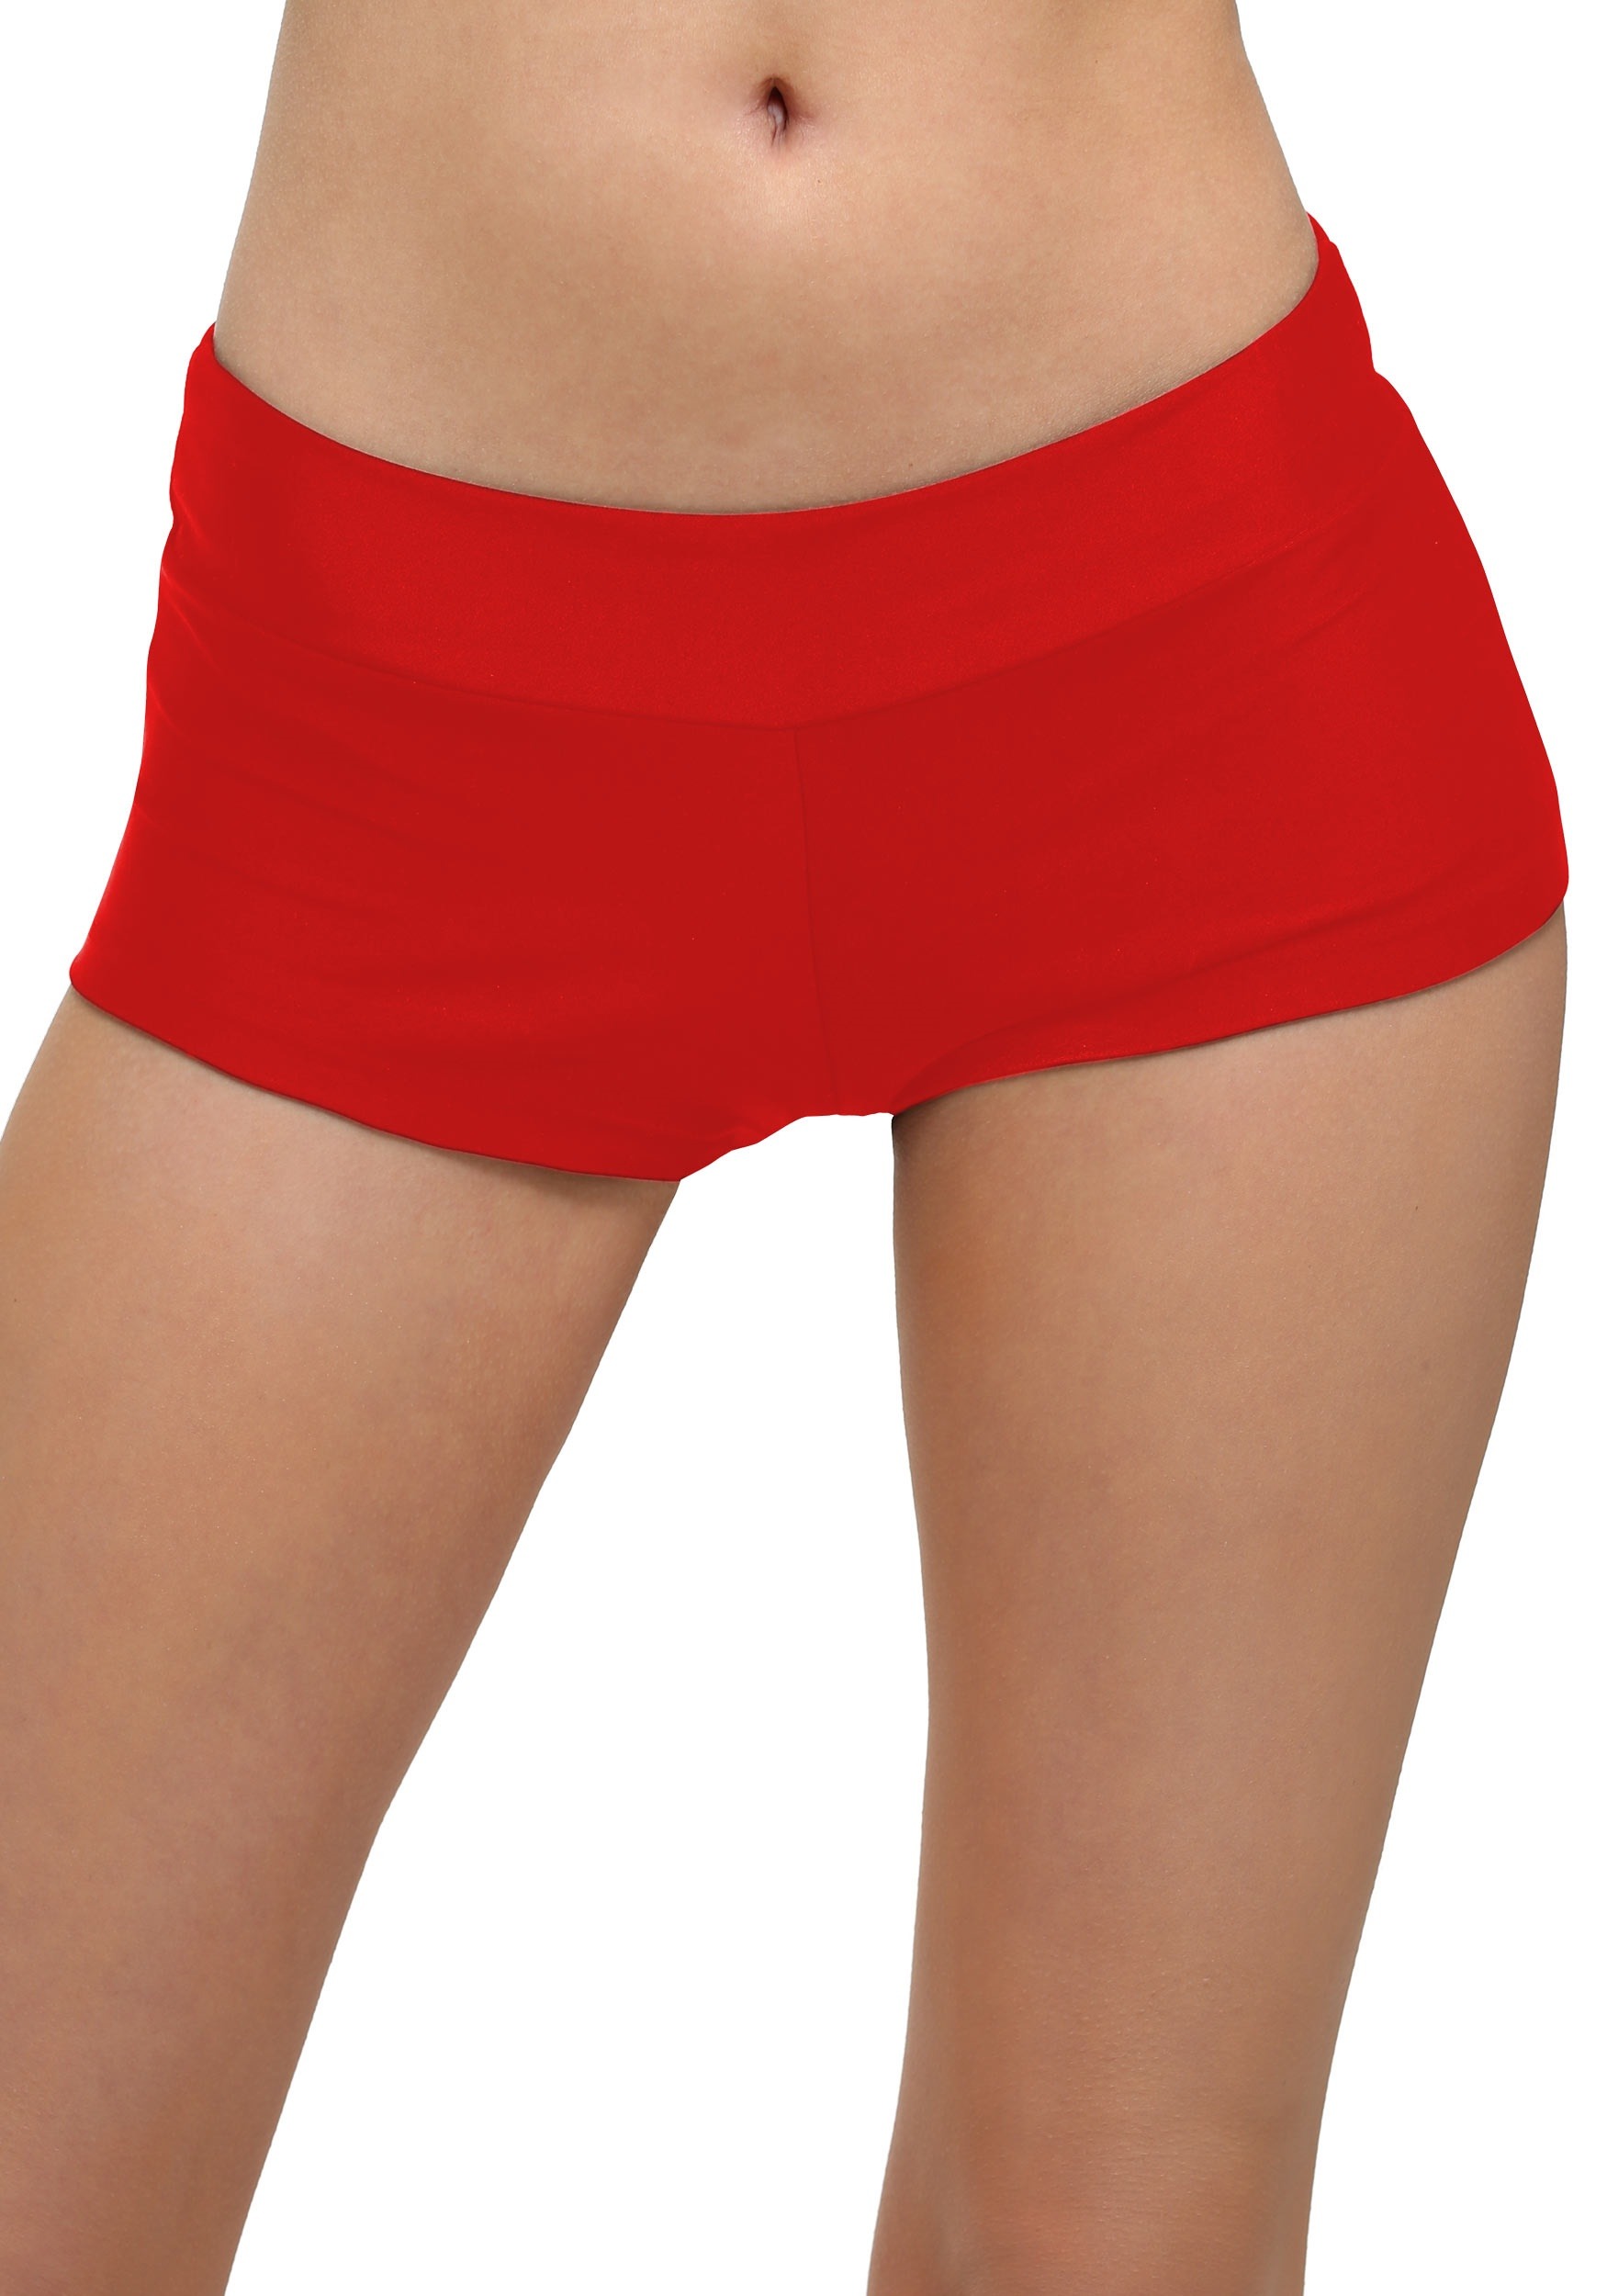 https://images.halloweencostumes.eu/products/41057/1-1/deluxe-red-hot-pants.jpg